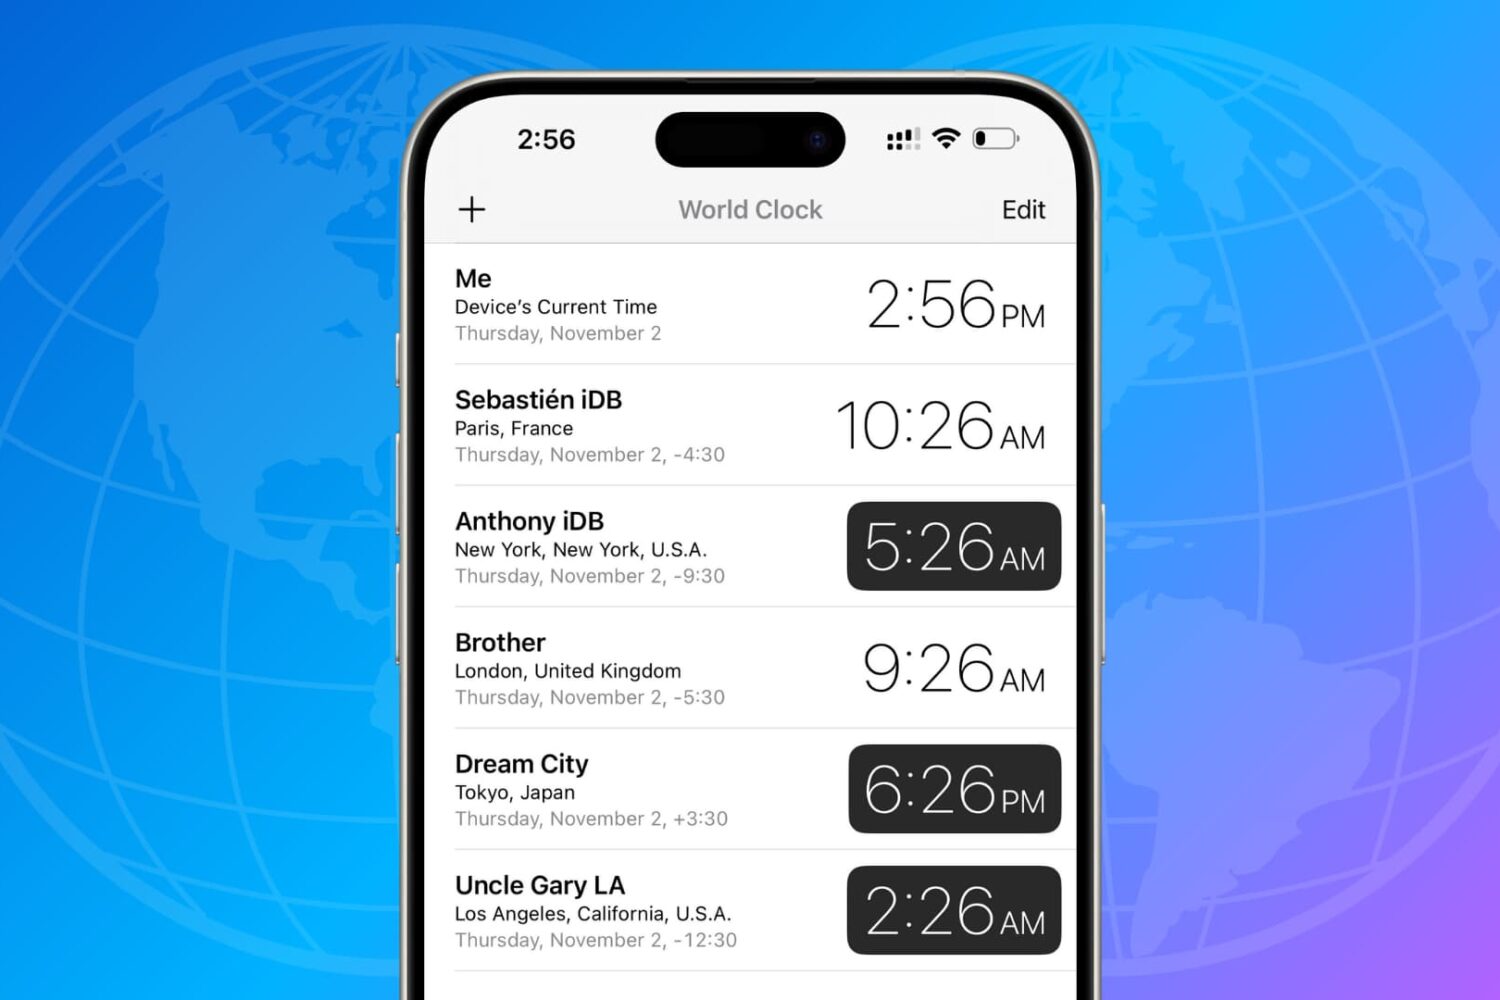 Personalized World Clock on iPhone showing time in different cities